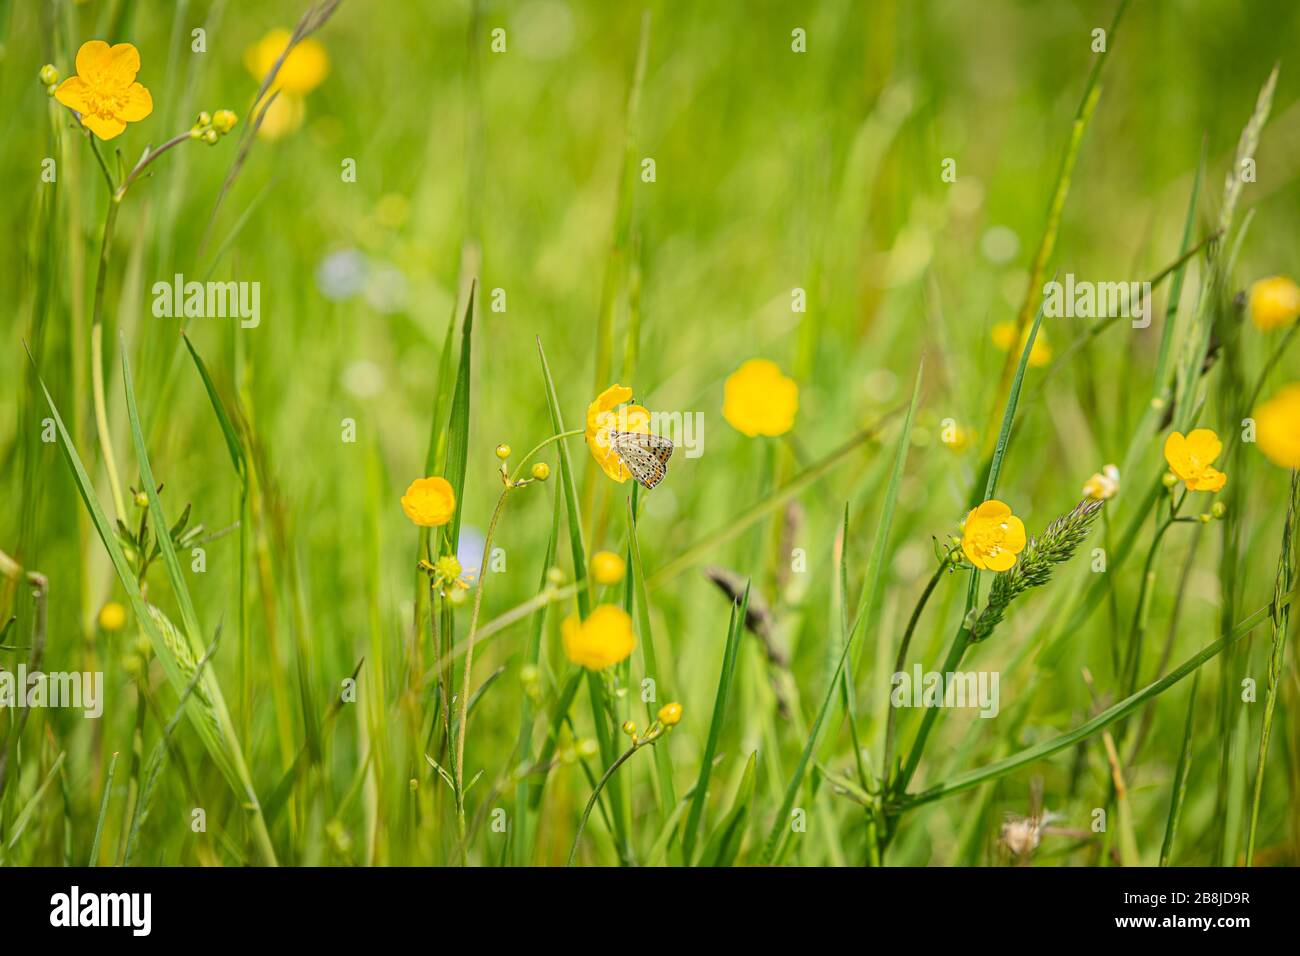 Fresh green grass with yellow flowers growing in a meadow. A tiny butterfly, sooty copper, sitting on buttercup flower. Sunny summer day in nature. Stock Photo